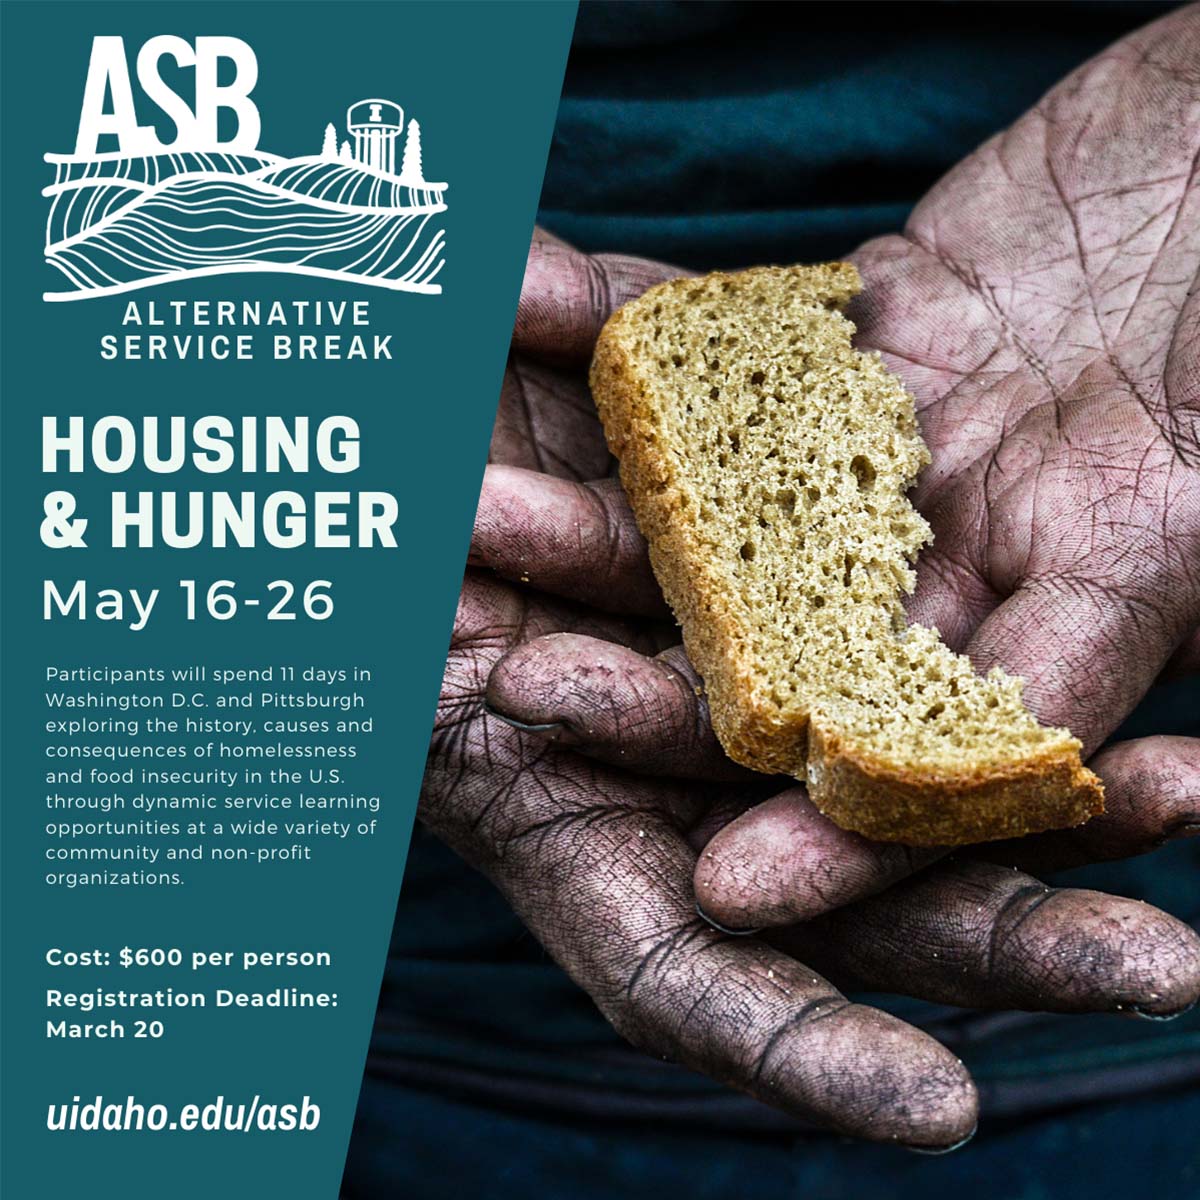 Register for our summer 2022 ASB trip Housing and Hunger!